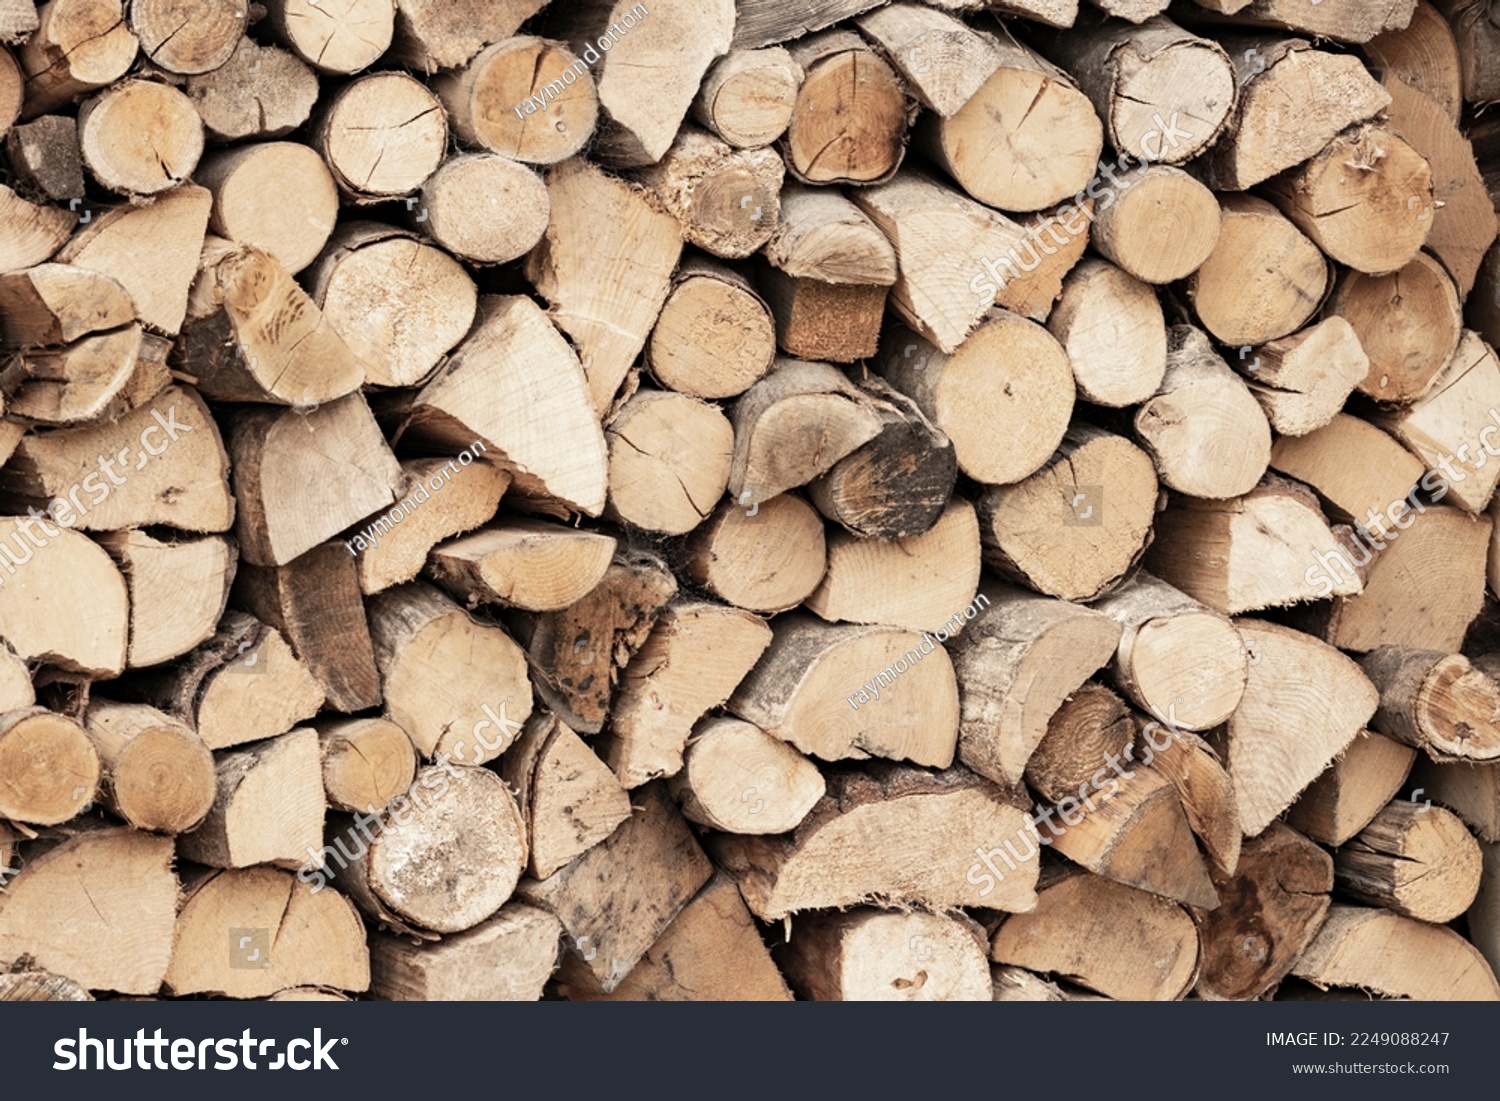 A supply of split and dried hardwood logs stacked up and ready for a cold winter #2249088247